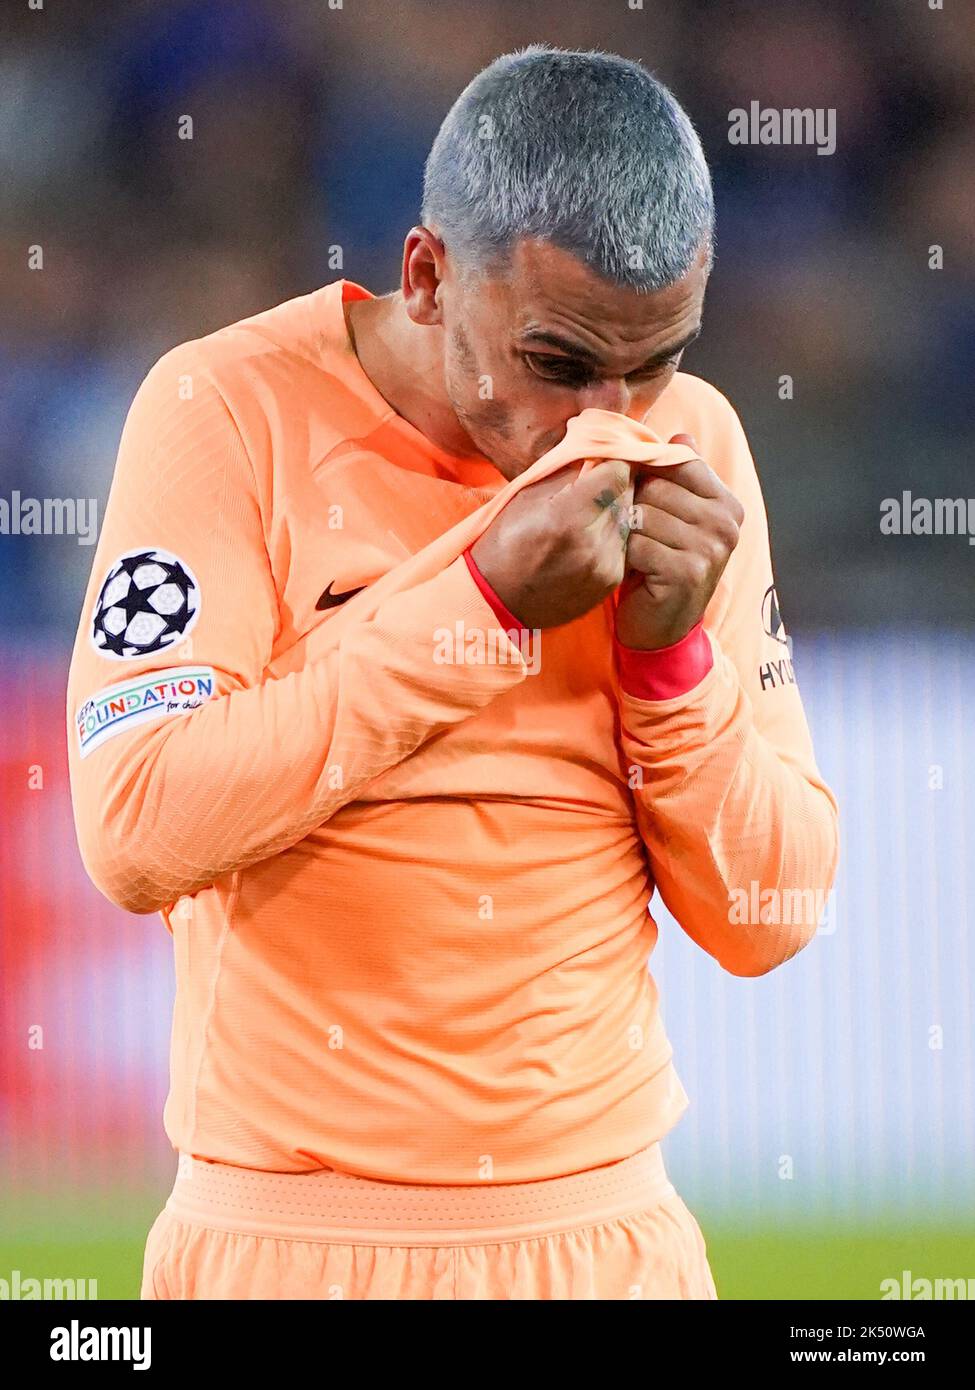 BRUGGES, BELGIUM - OCTOBER 4: Antoine Griezmann of Atletico Madrid looks dejected after the Group B - UEFA Champions League match between Club Brugge KV and Atletico Madrid at the Jan Breydelstadion on October 4, 2022 in Brugges, Belgium (Photo by Joris Verwijst/Orange Pictures) Stock Photo